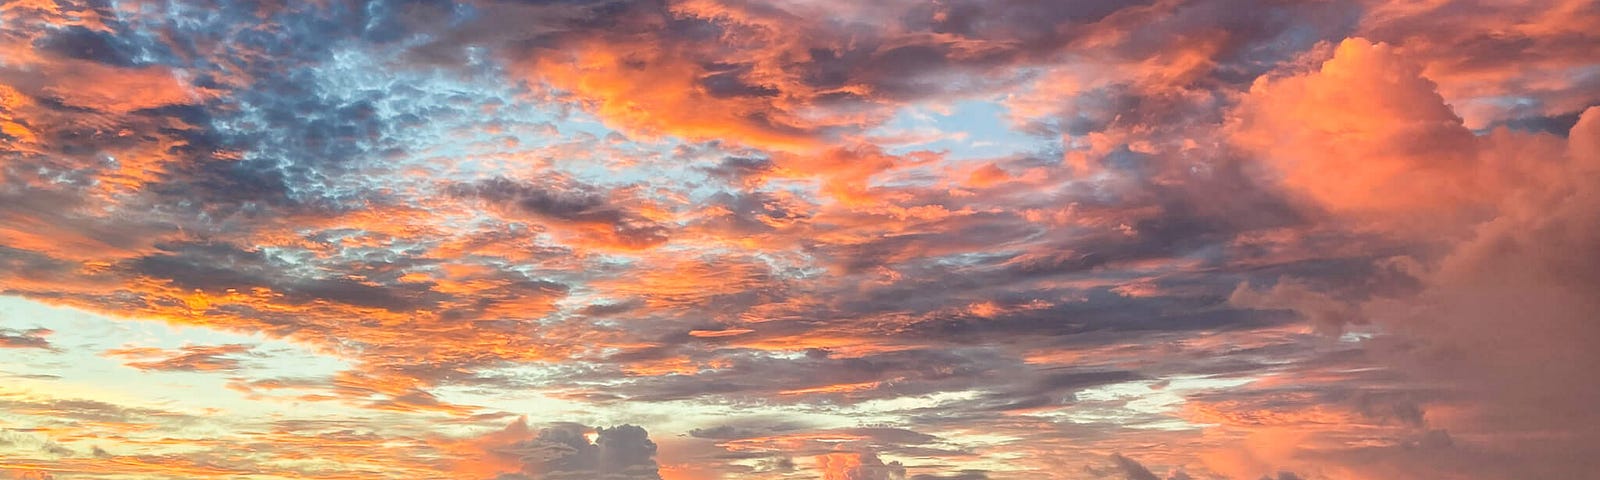 Orange and pink colored clouds in a big sky over an ocean seen from the beach